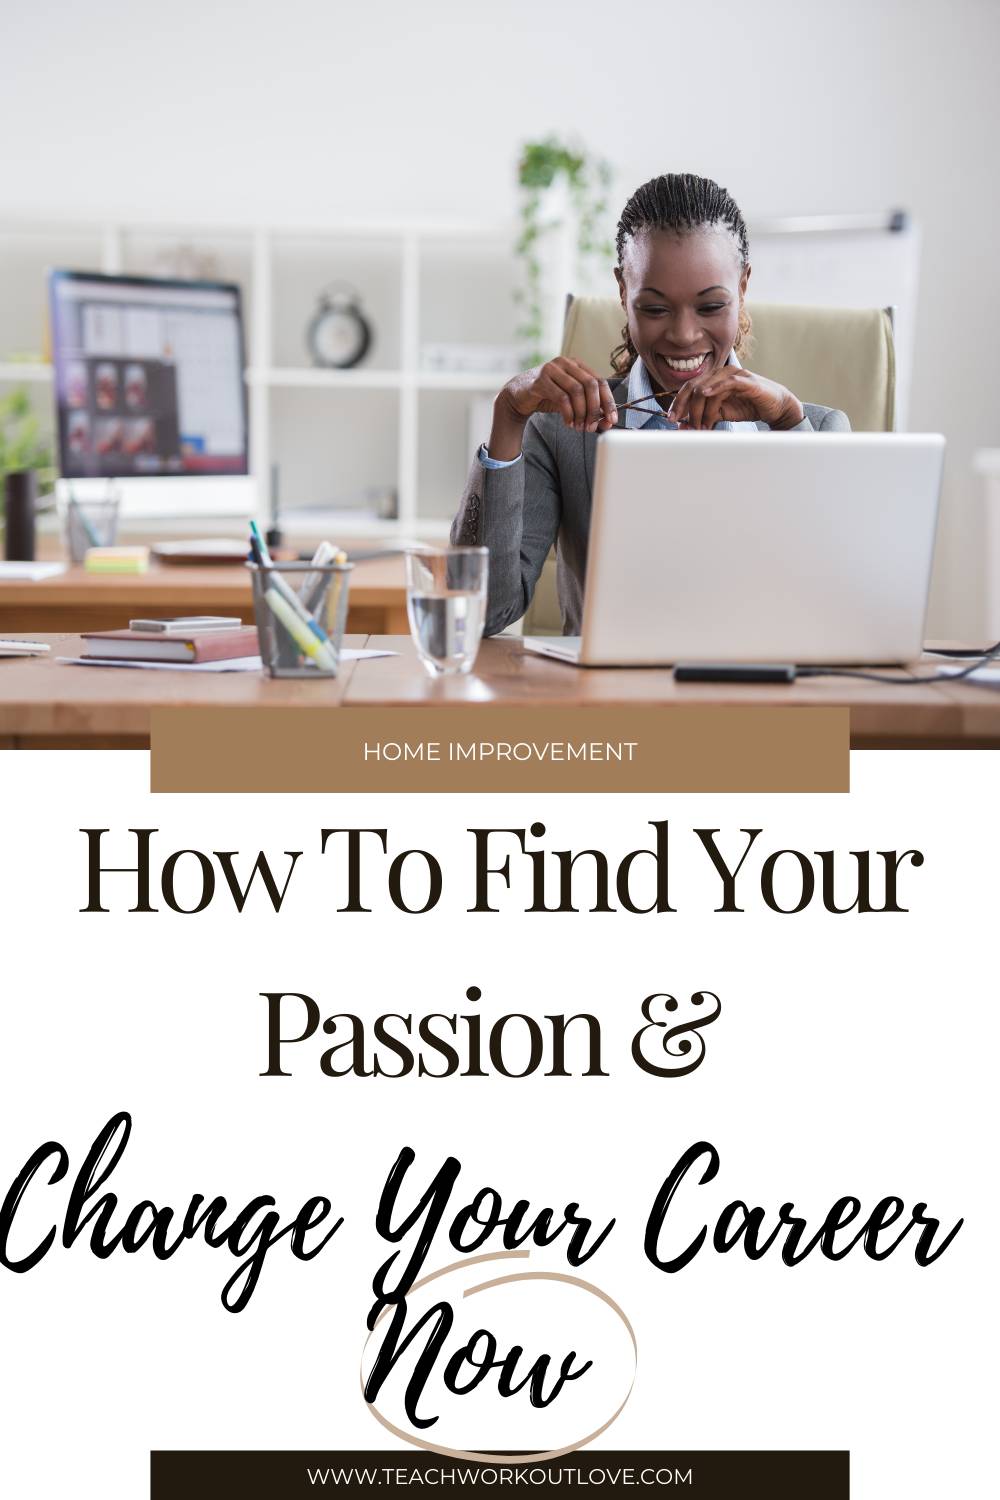 If you’re considering applying for a new job as a working mom, or looking to change your career, here are some tips to help find your passion. 